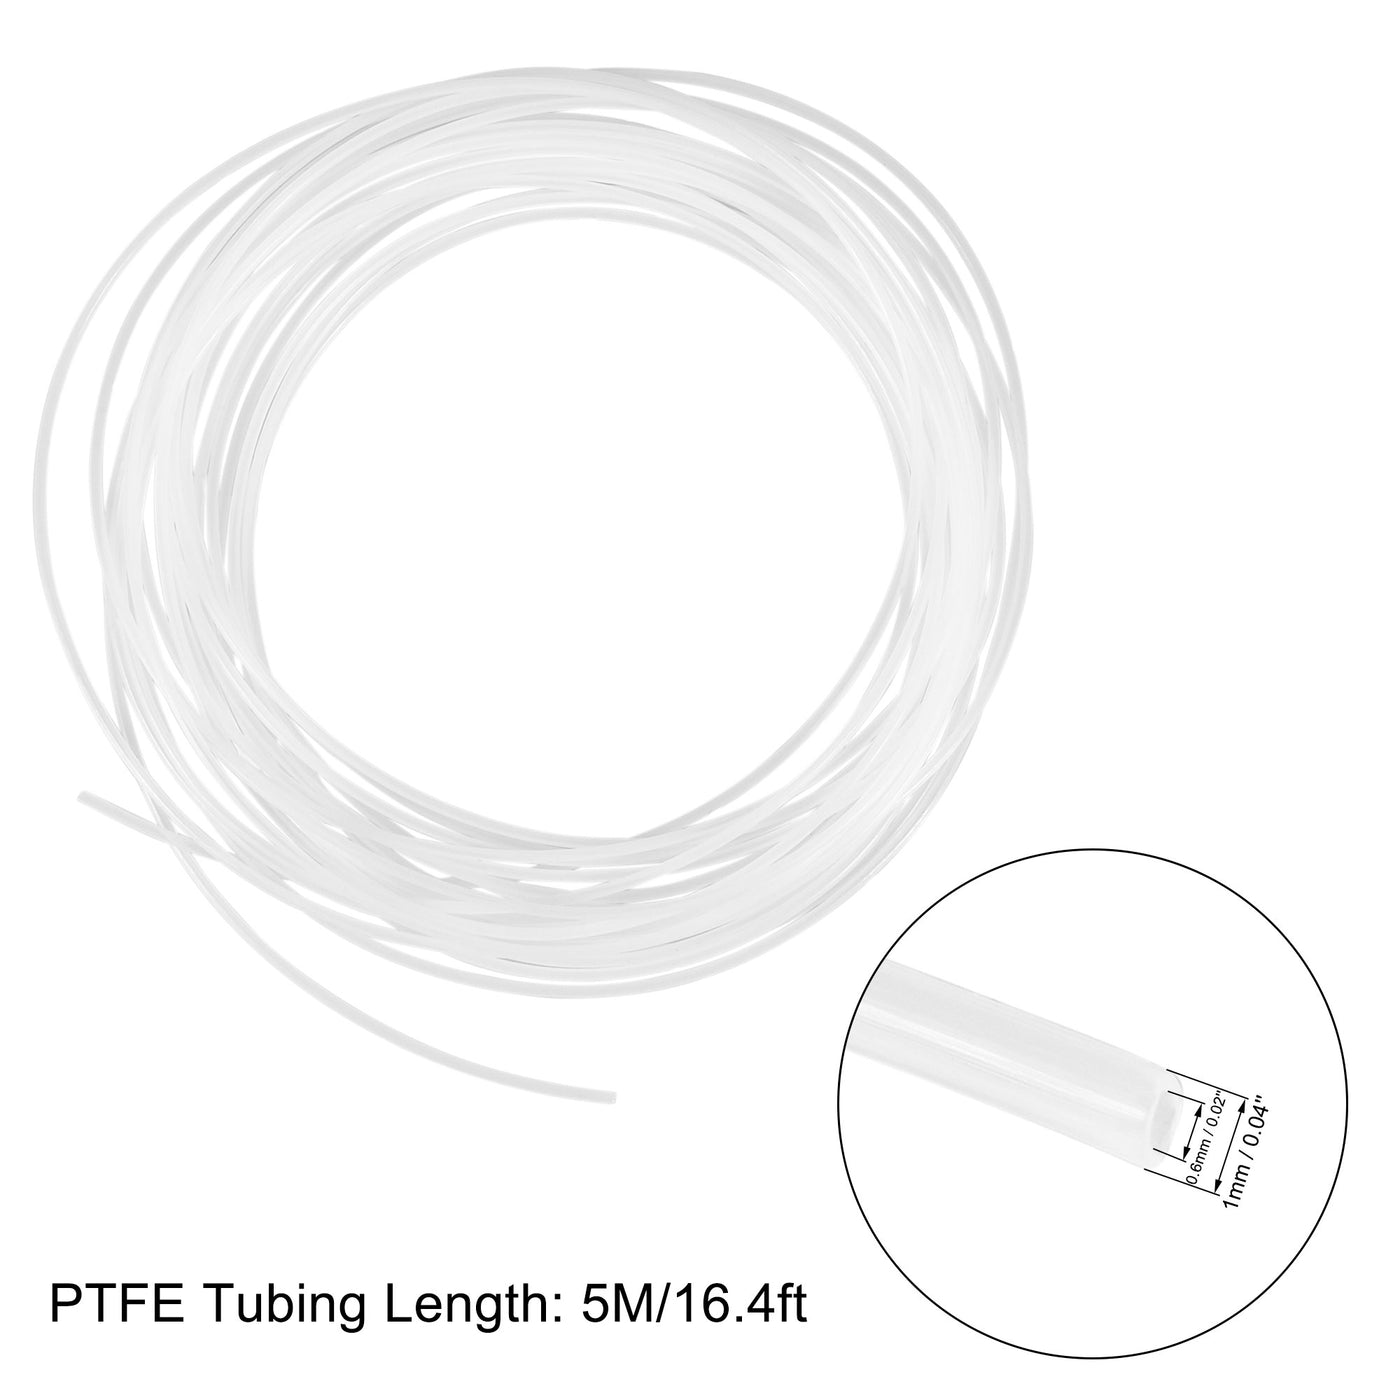 uxcell Uxcell PTFE Tubing Hose High Temperature Multifunctional Pipe White 0.6mm/0.02''ID x 1mm/0.04''OD x 16.4ft with Tube Cutter